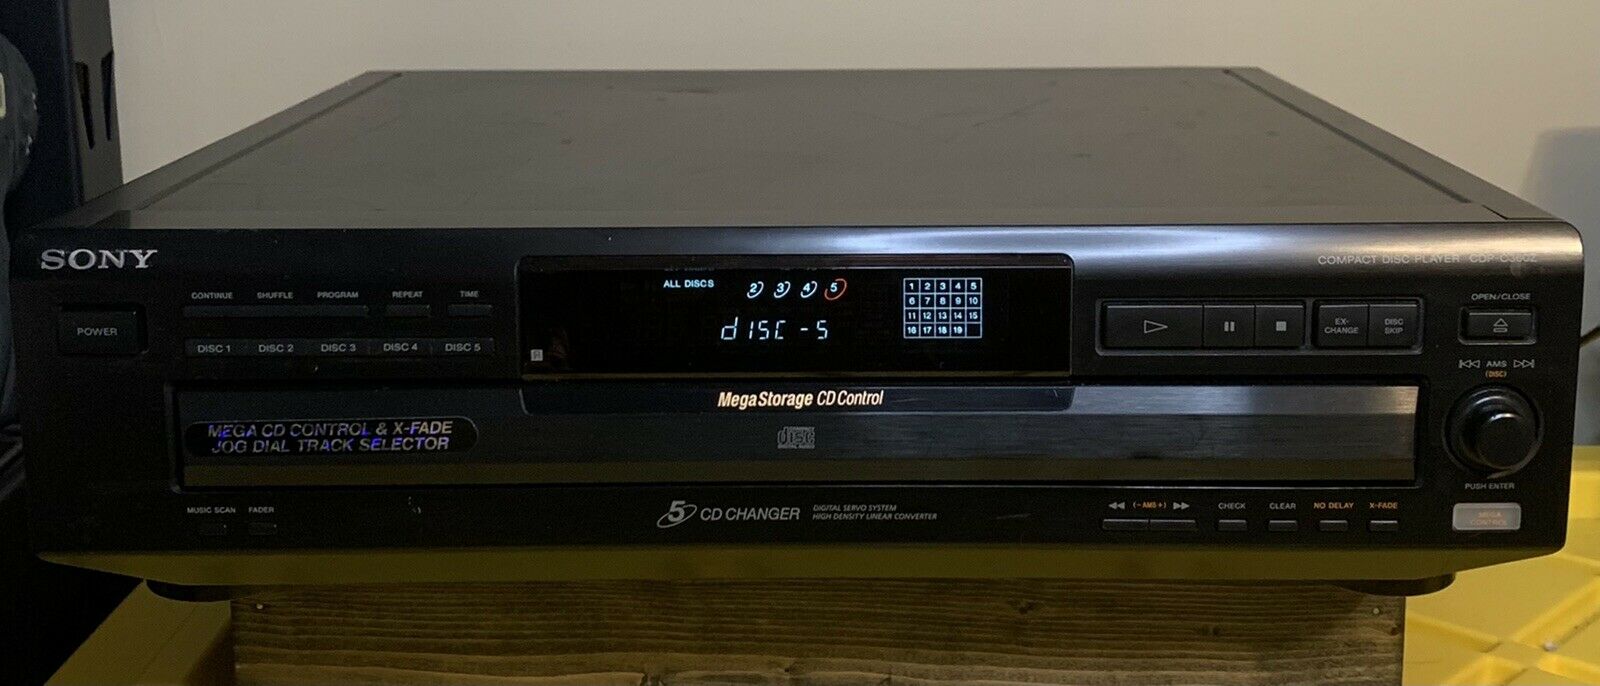 Sony Cdp-c360z Cd Changer 5 Compact Disc Player Hifi Stereo Carousel Tested